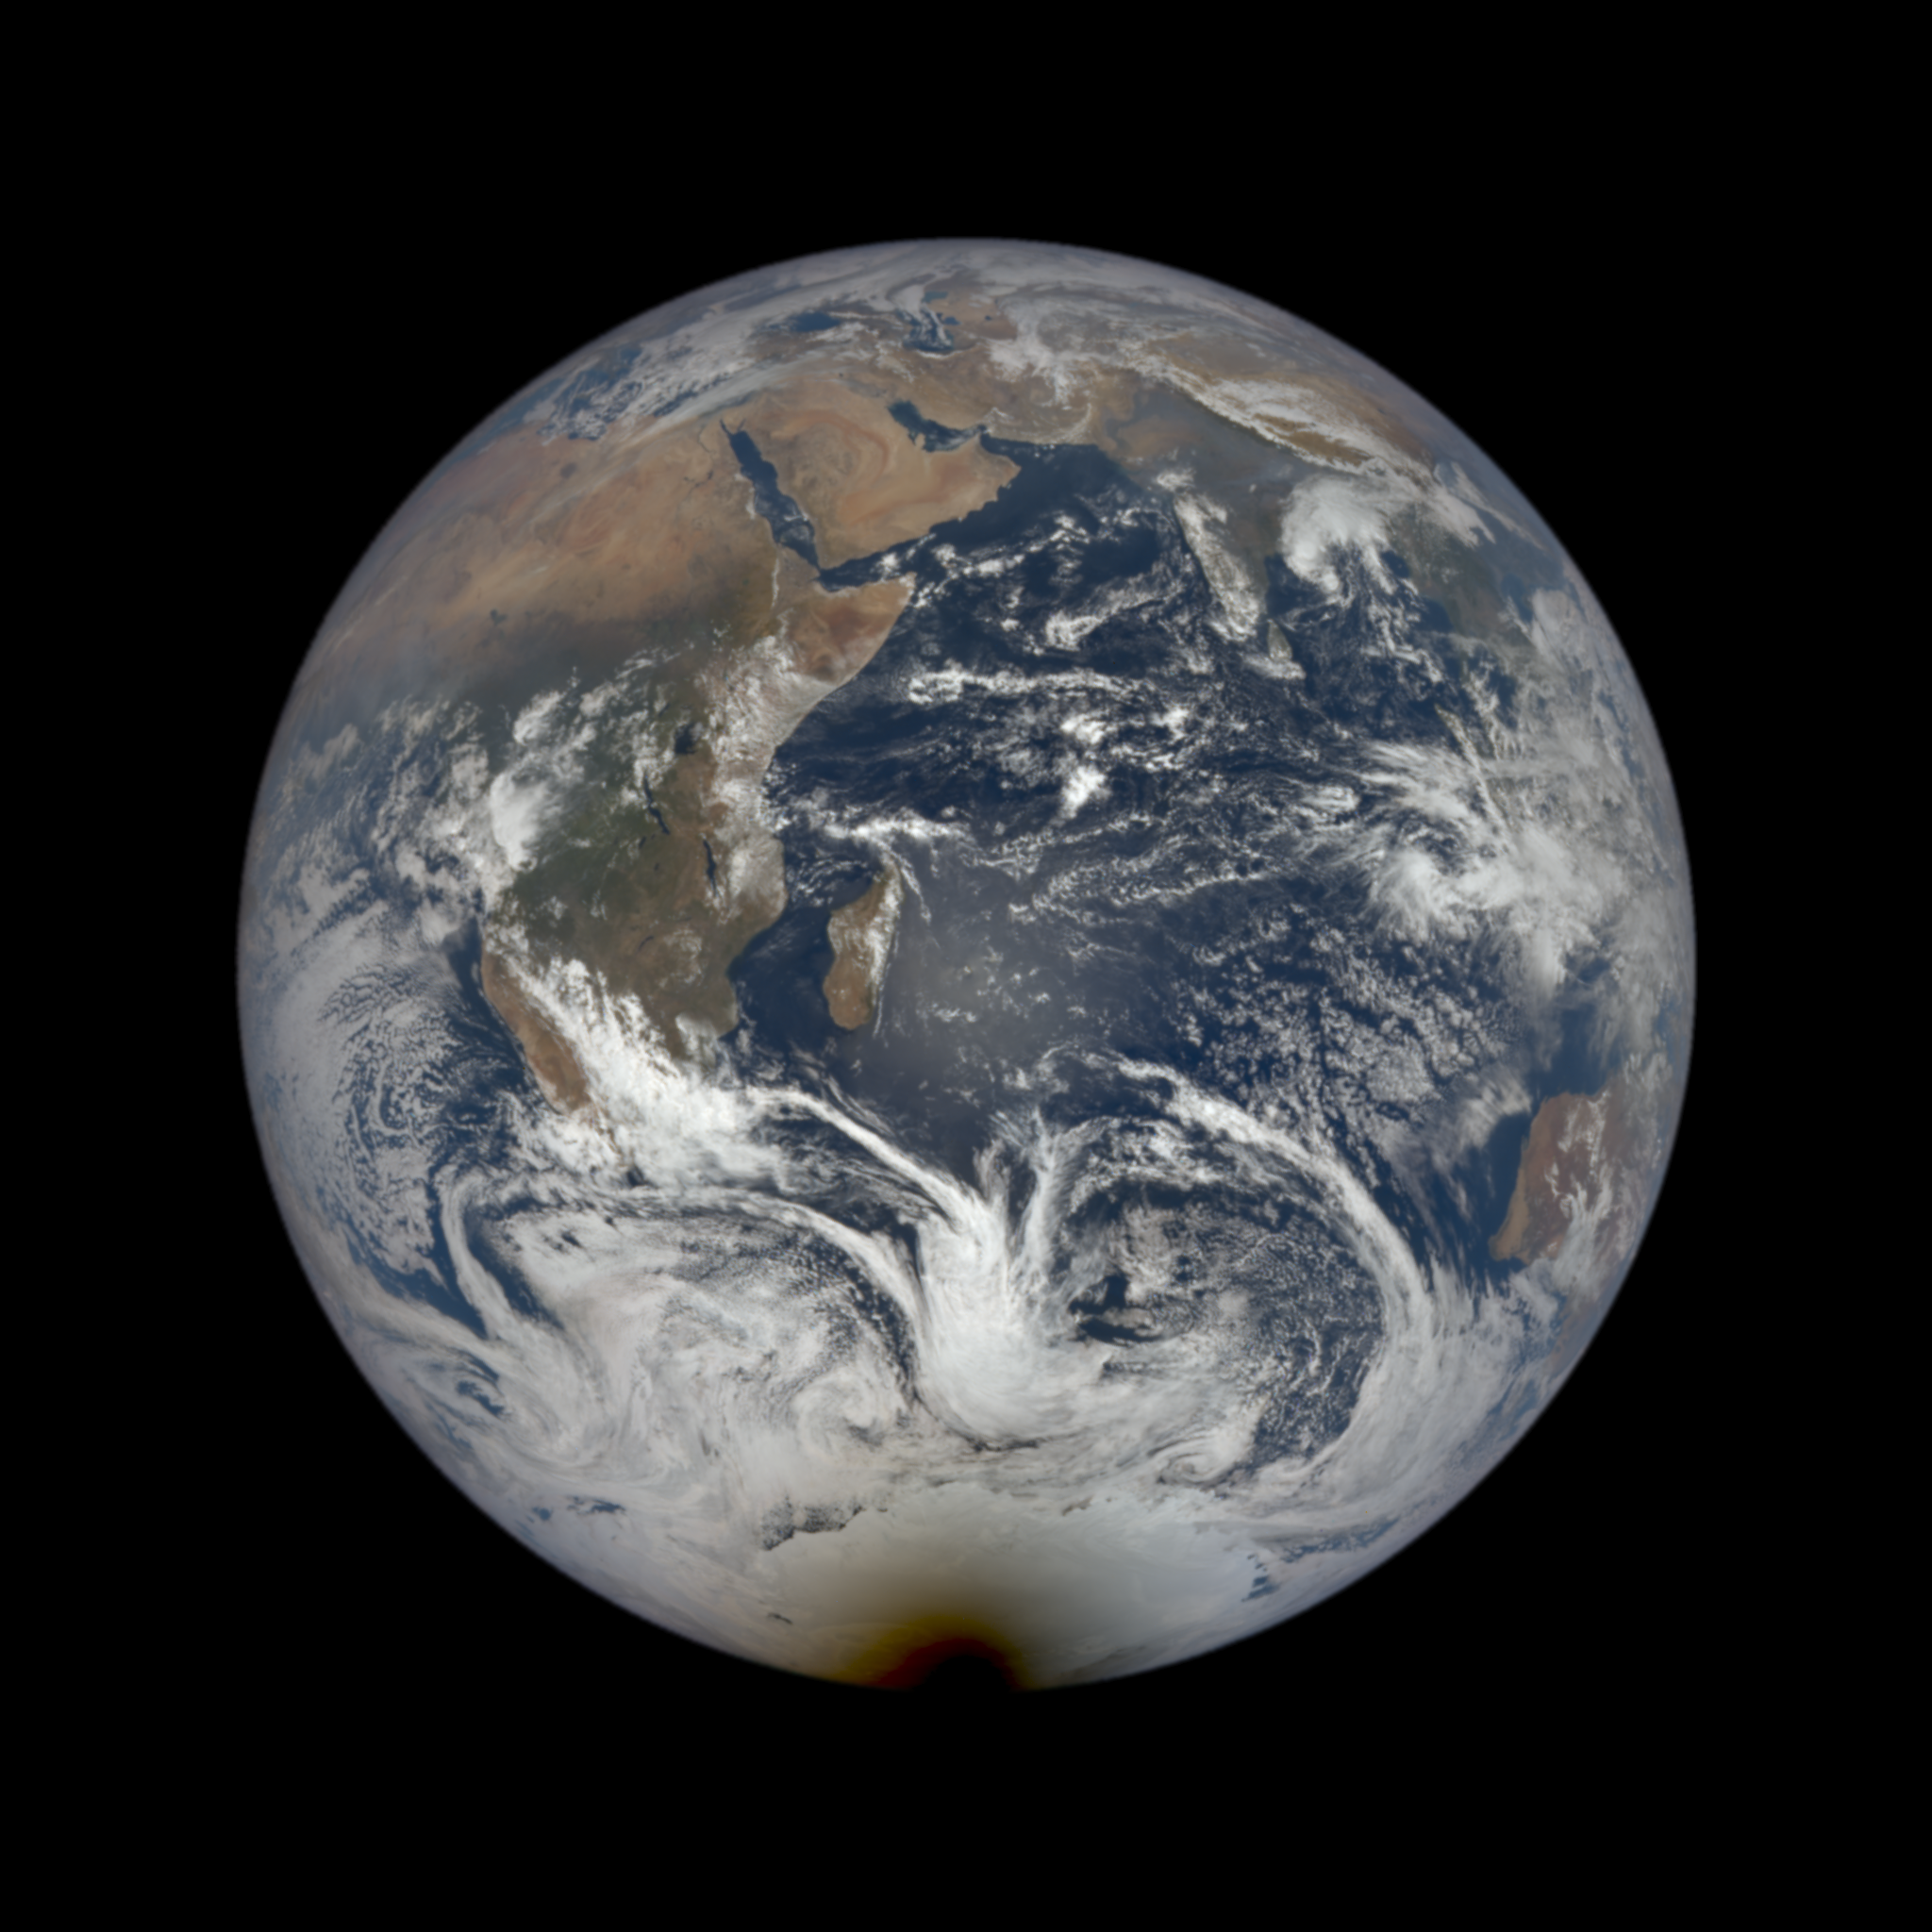 The solar eclipse in Antarctica captured from the DSCOVR spacecraft on December 4. 